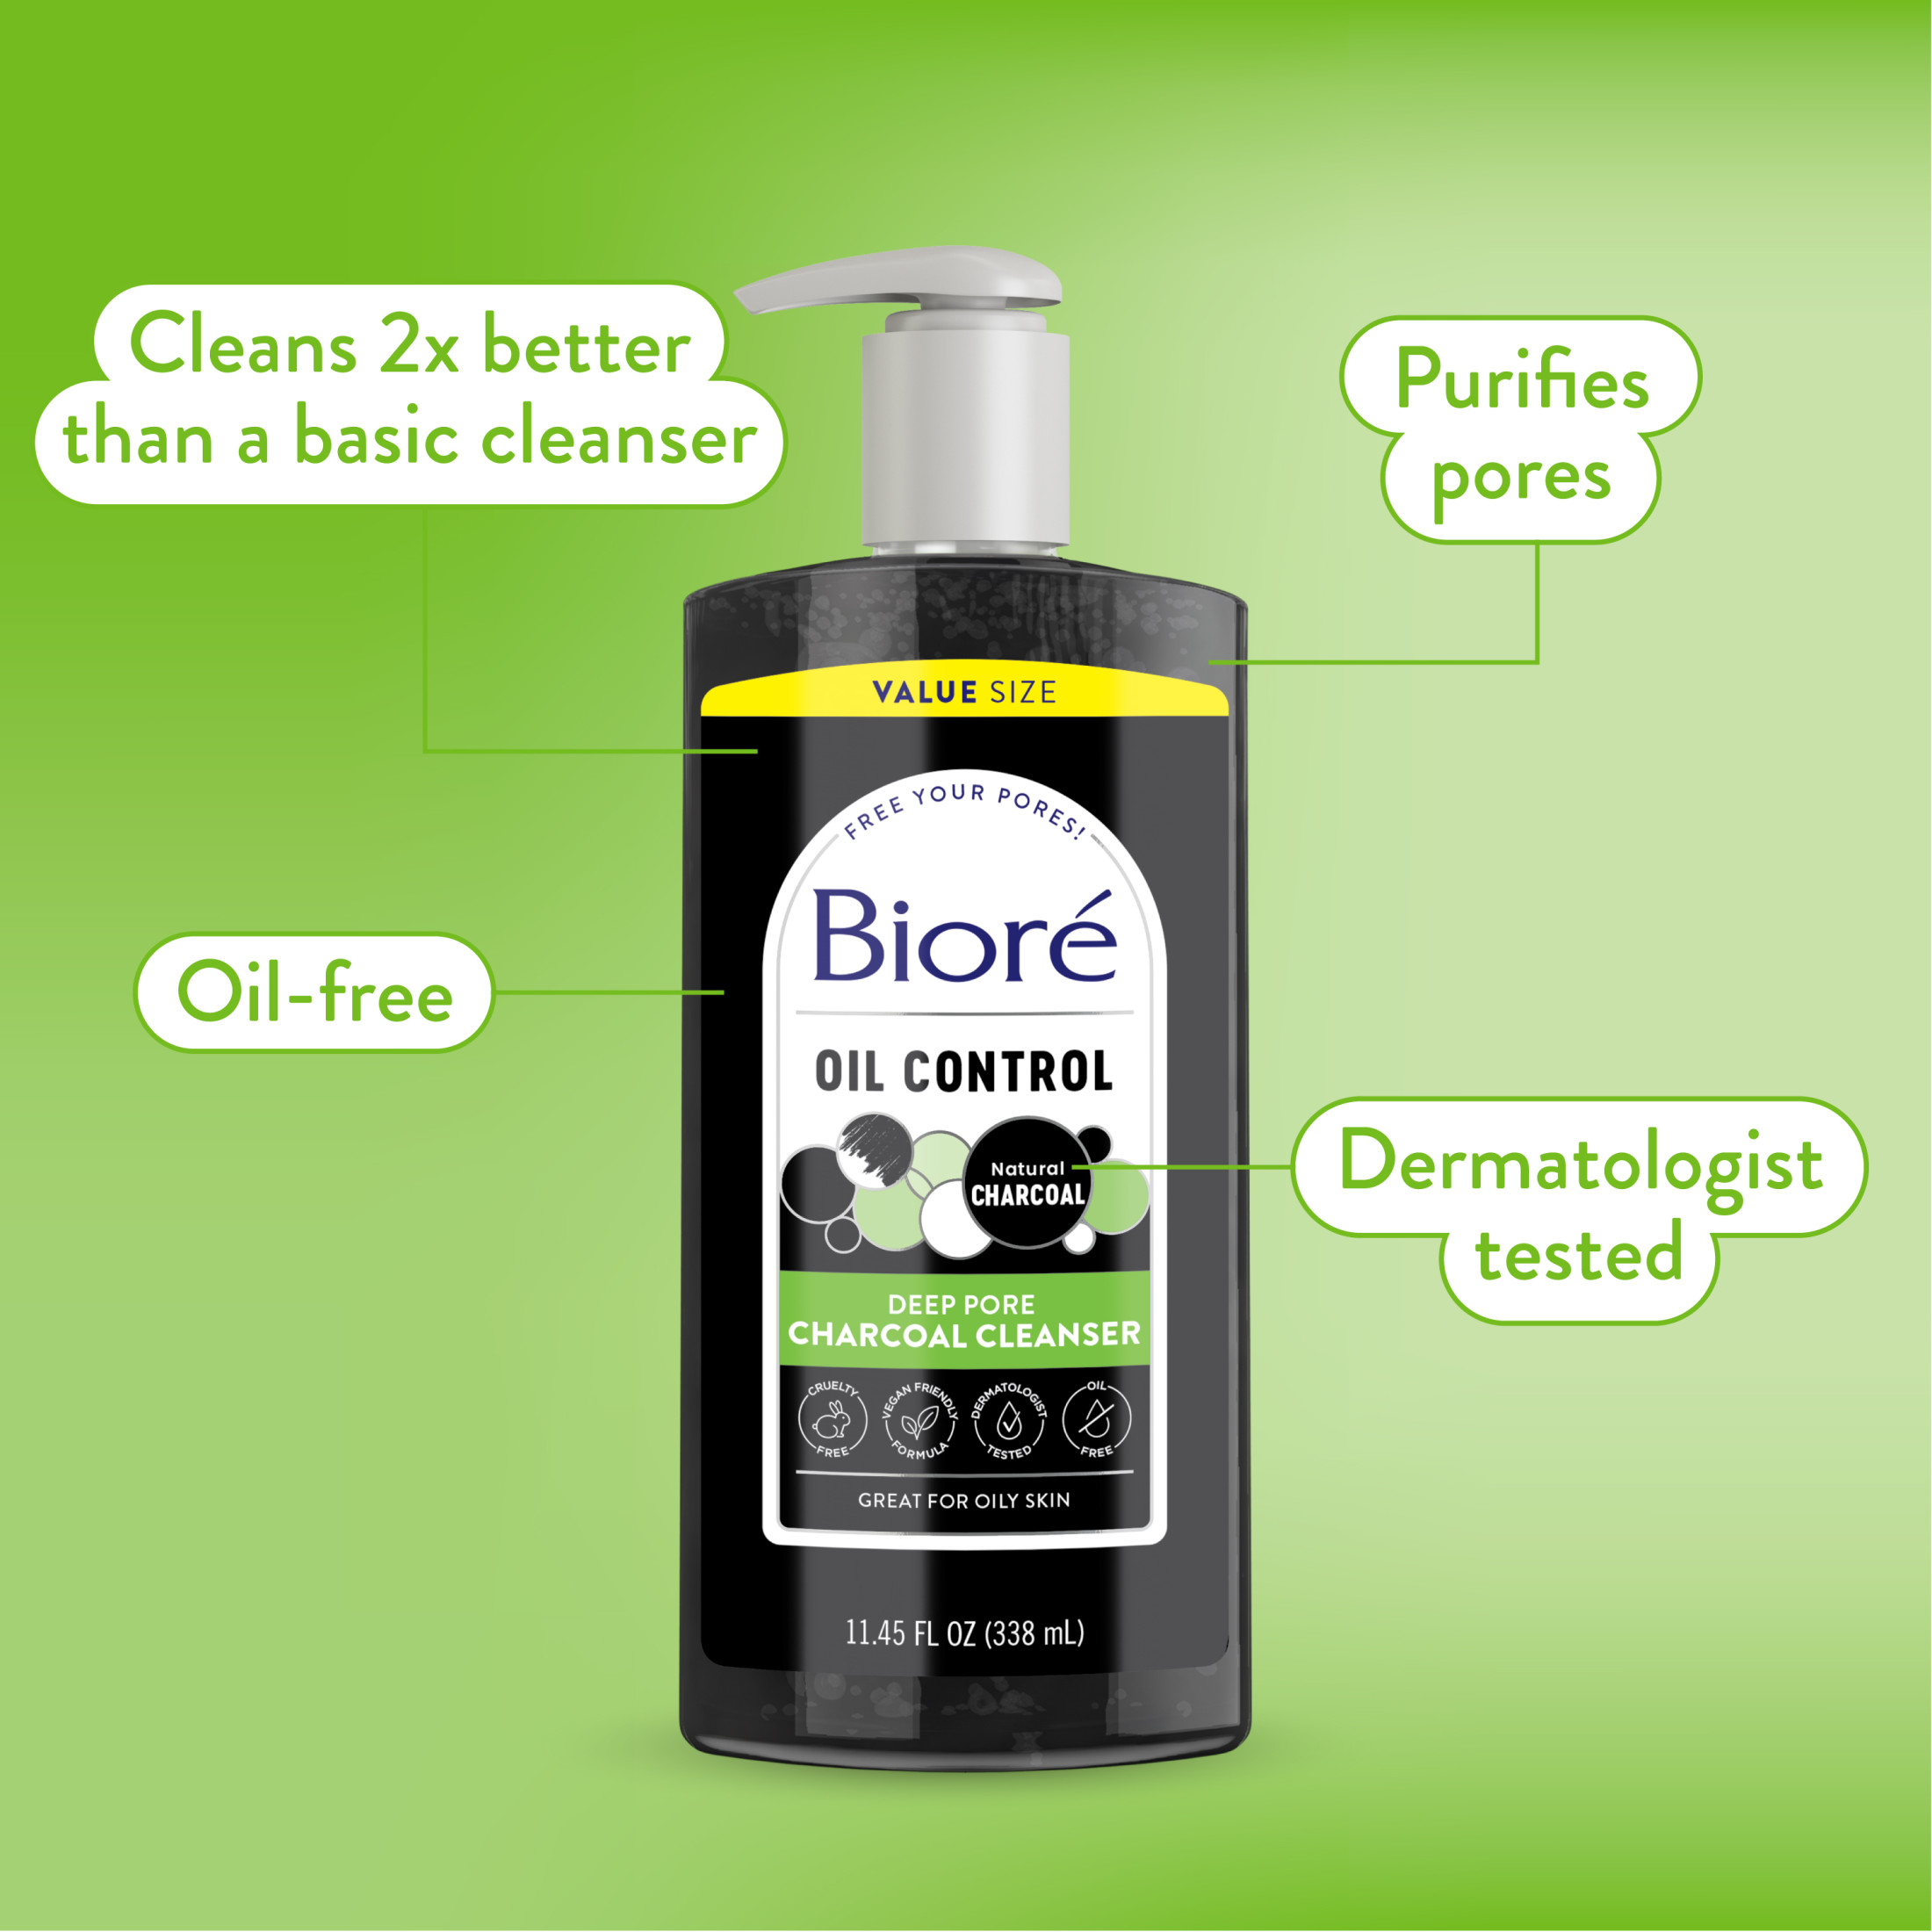 Biore Deep Pore Charcoal Face Wash, Daily Facial Cleanser for Dirt & Makeup Removal, for Oily Skin, 11.45 oz - image 3 of 10